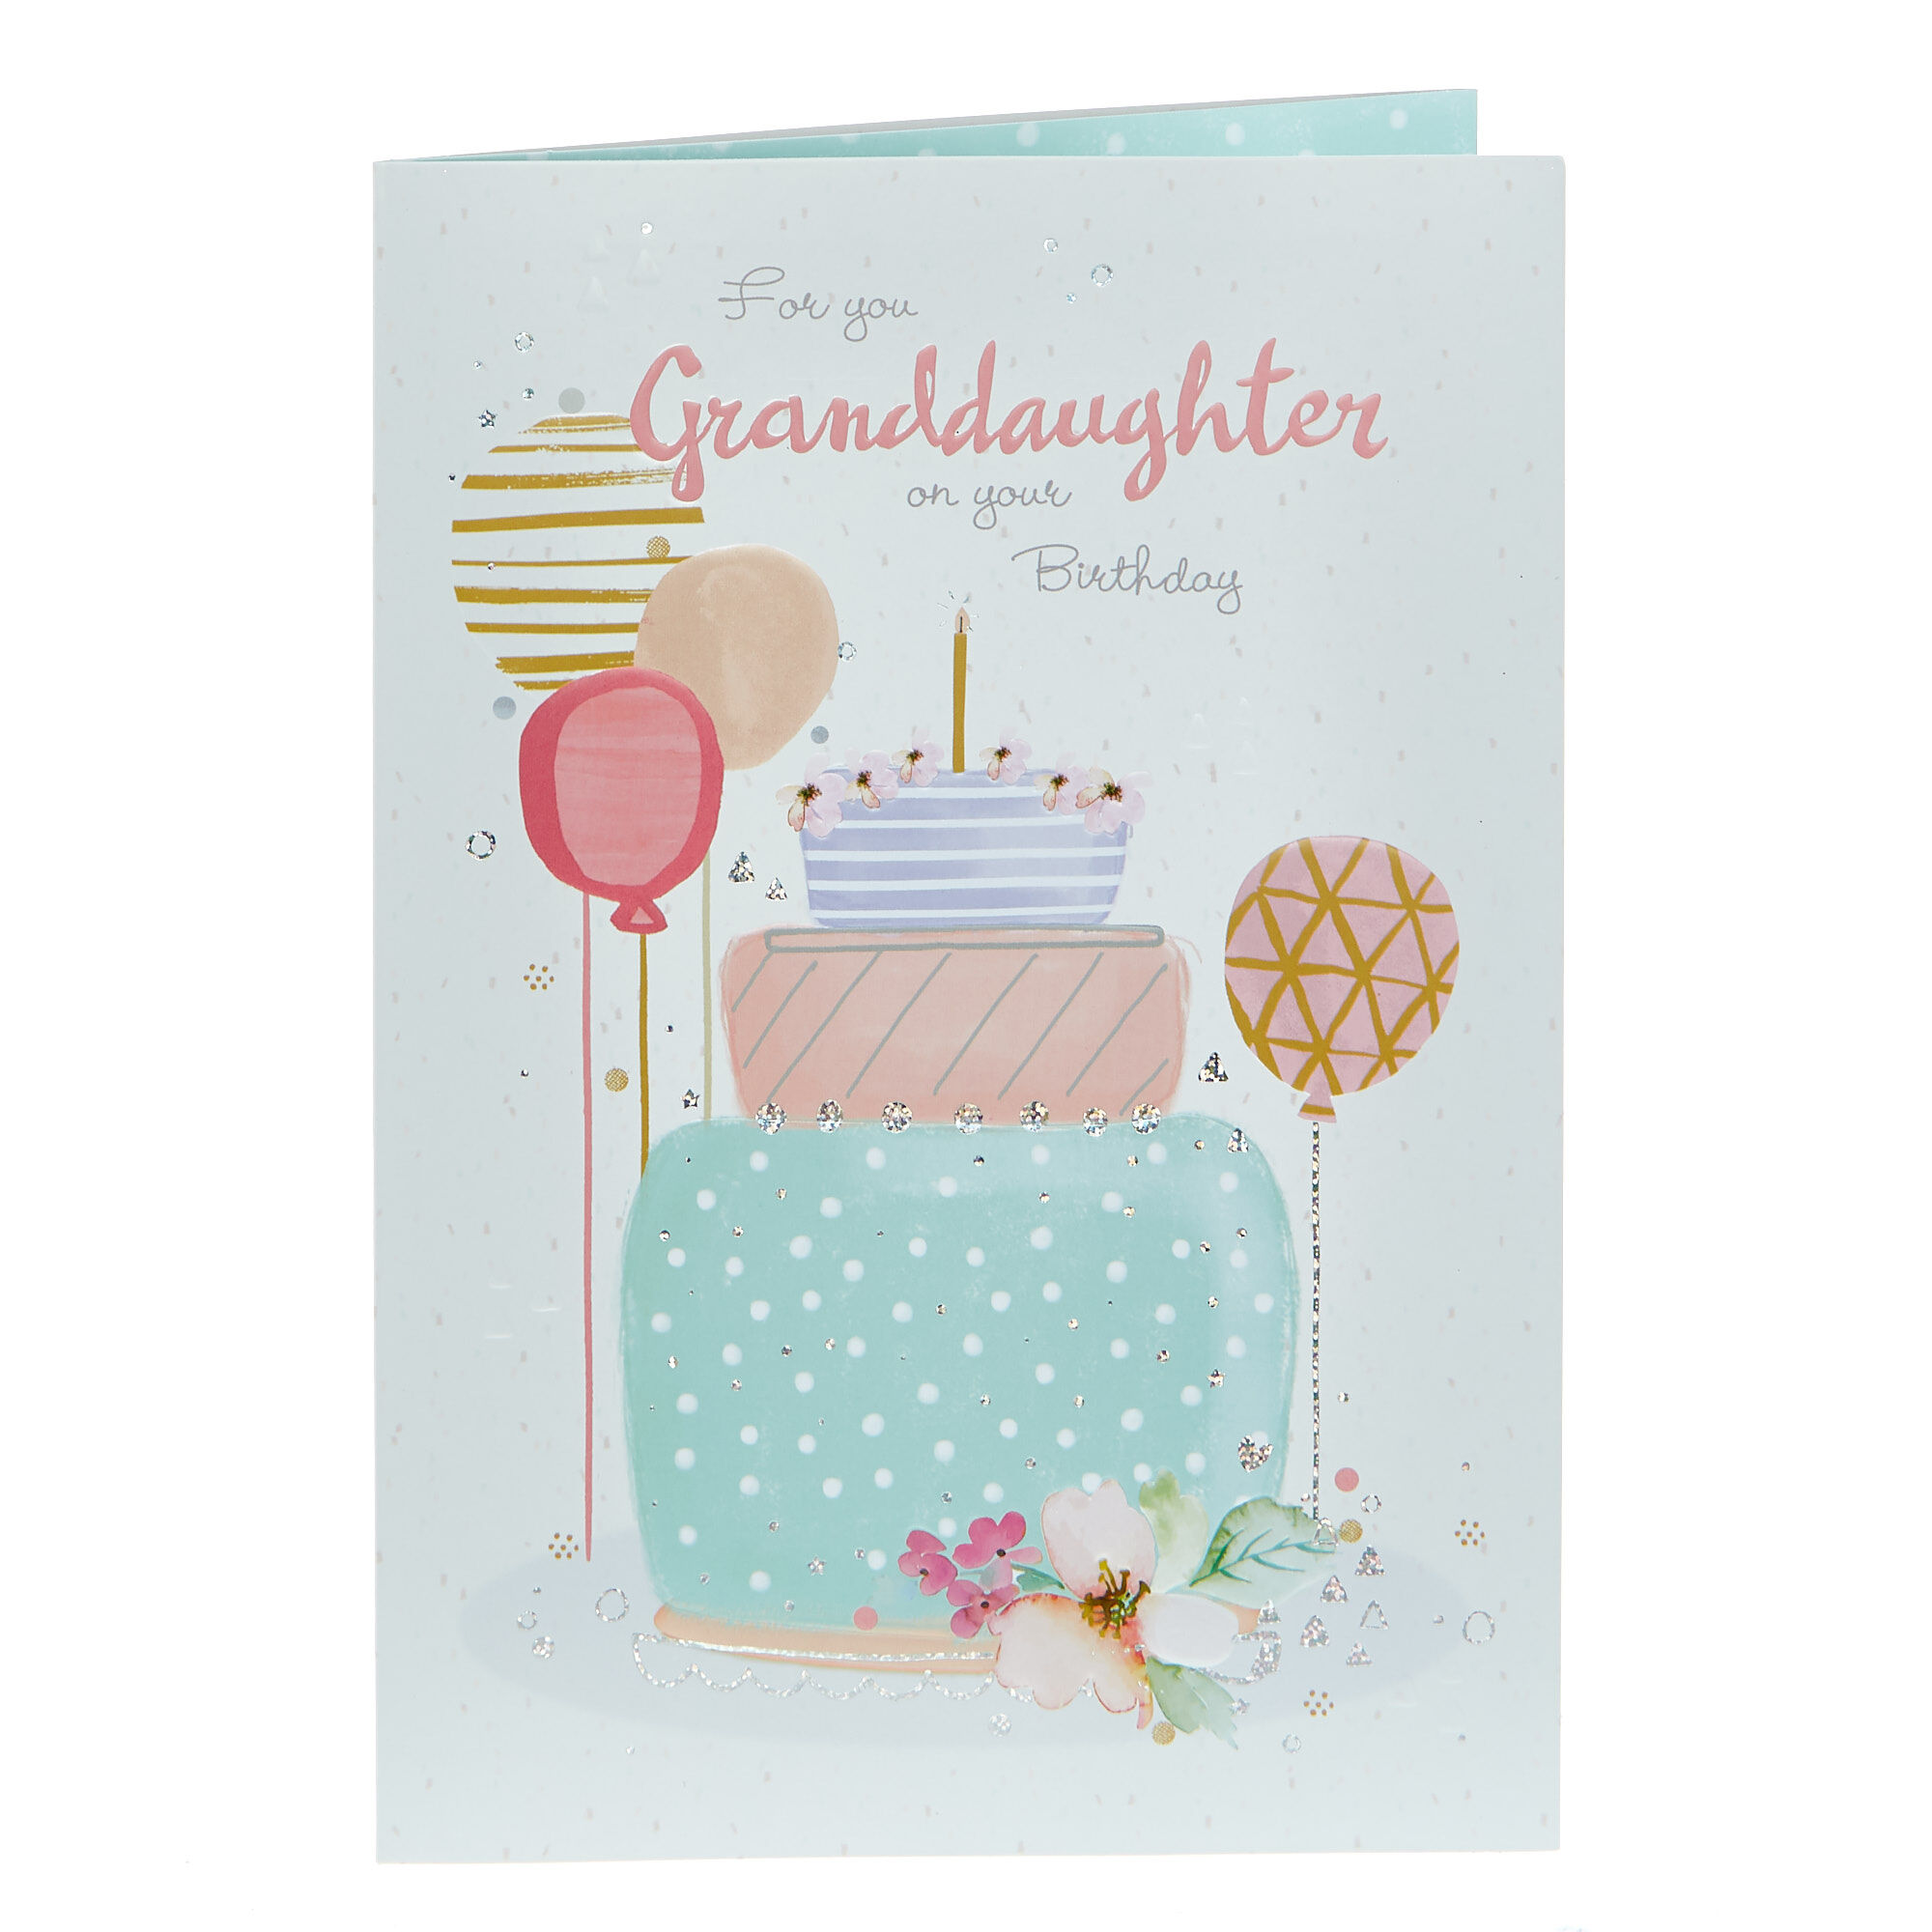 Birthday Cake Cards for Granddaughter | Birthday & Greeting Cards by Davia  - Free eCards